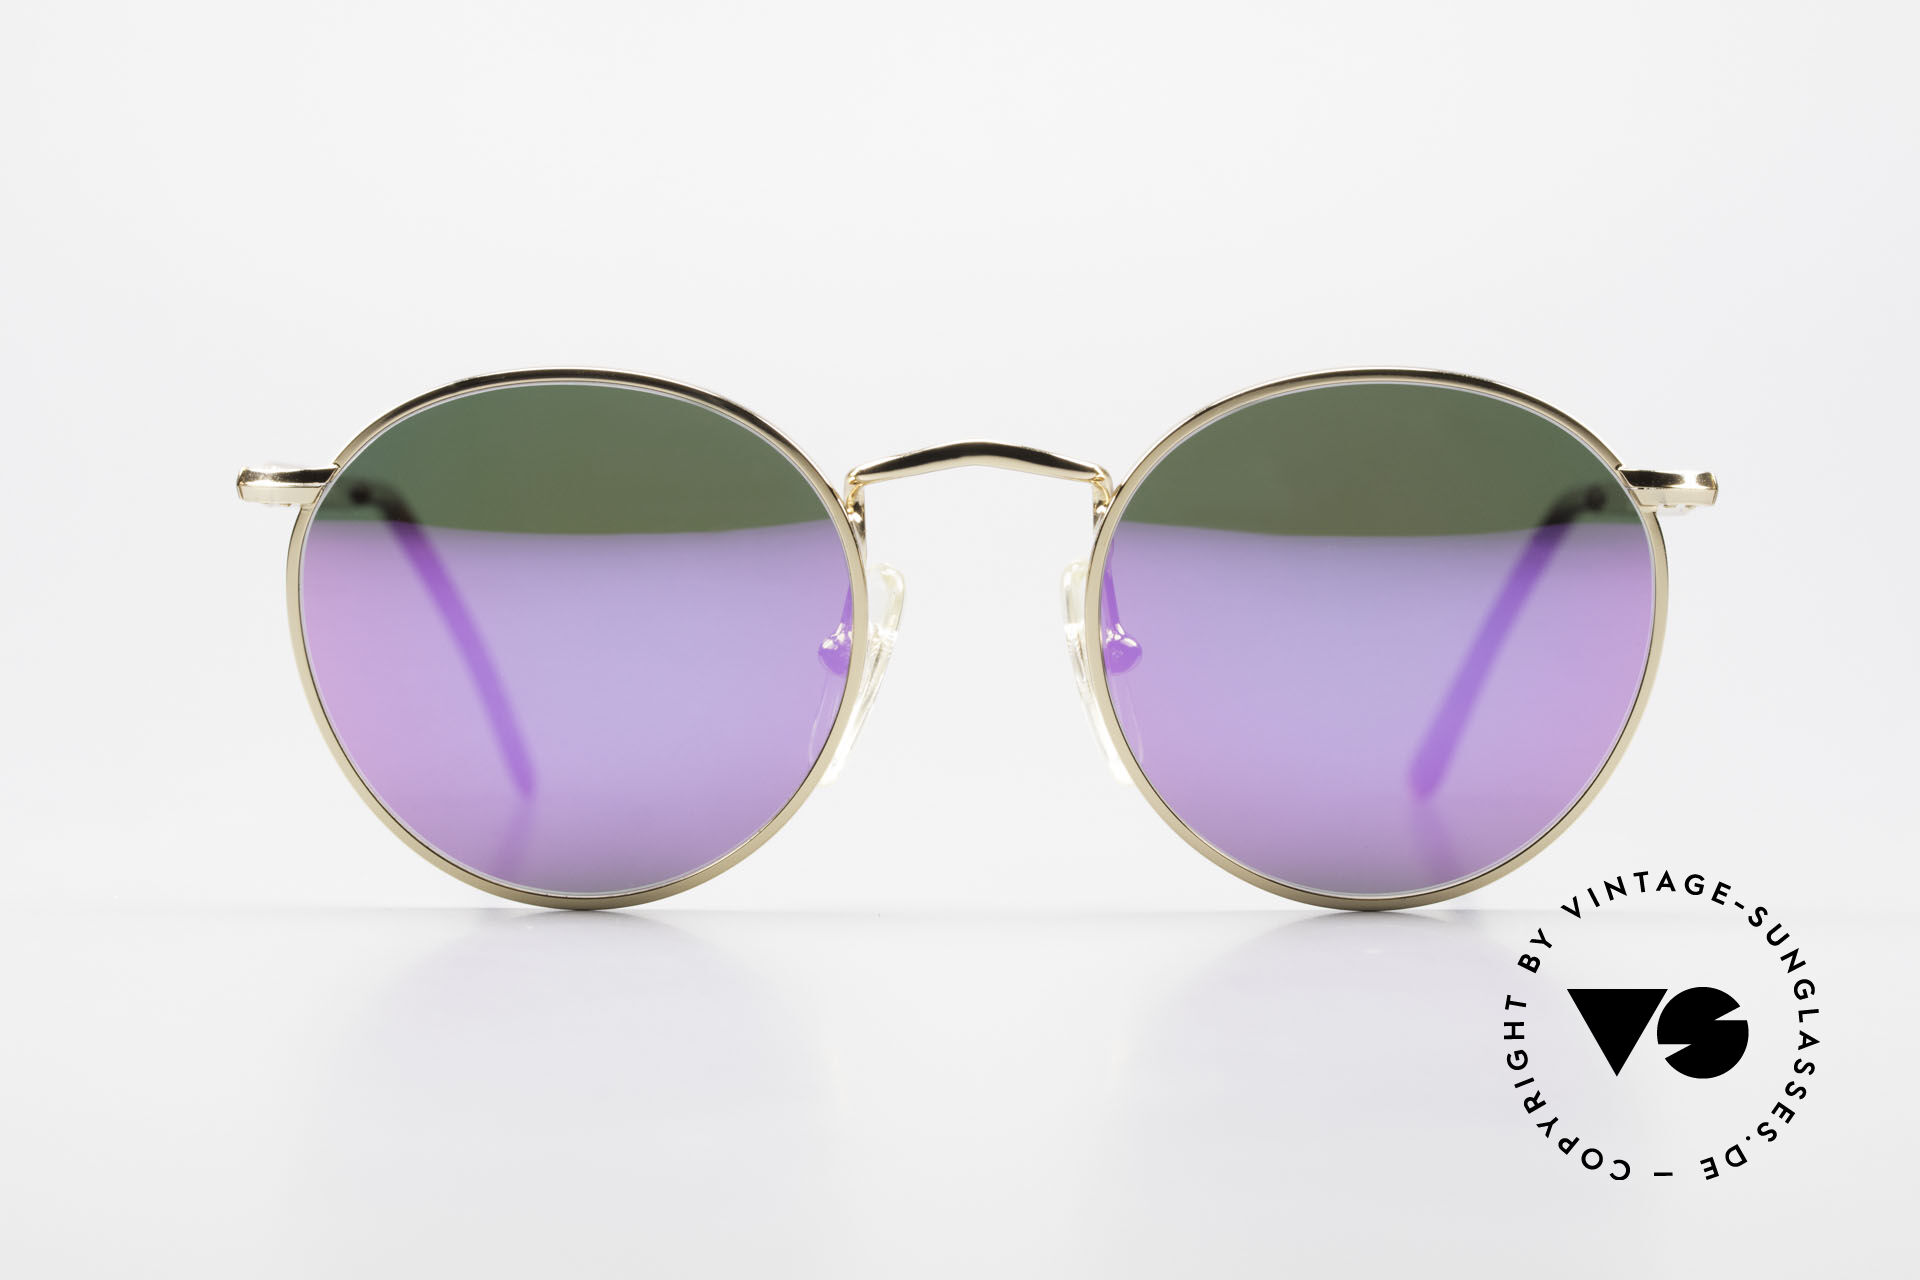 UV400 Steampunk Sunglasses Retro Round Mirror Shades For Men And Women,  Perfect For Outdoor Sports And Travel From Xzxzccc, $9.49 | DHgate.Com